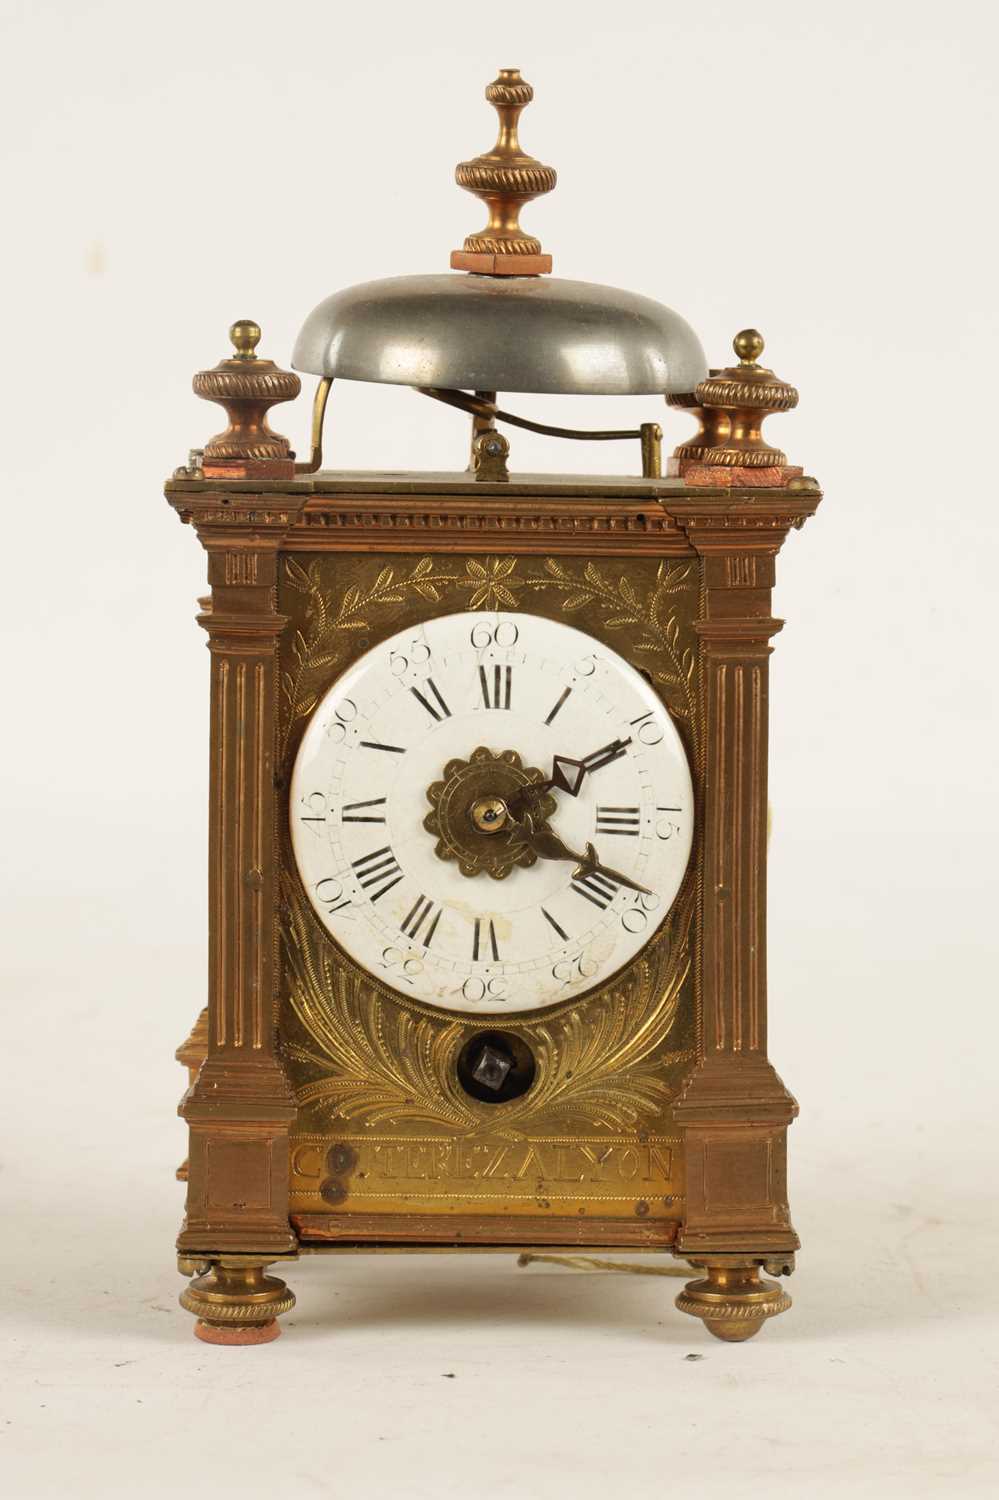 AN EARLY 19TH CENTURY FRENCH CAPUCINE STYLE CARRIAGE/MANTEL CLOCK - Image 2 of 9